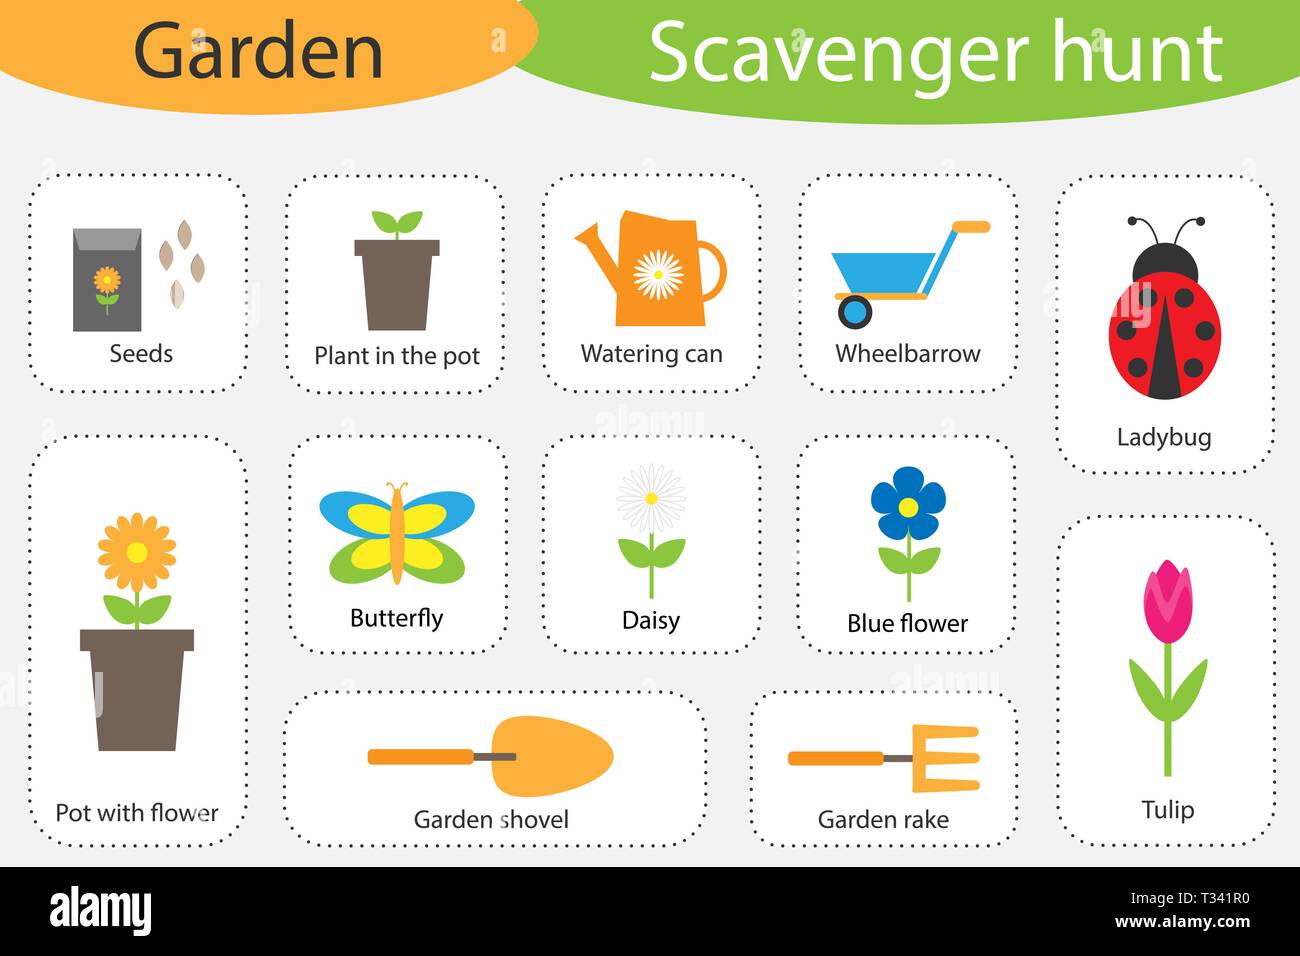 Scavenger Hunt Garden Theme Different Colorful Pictures For